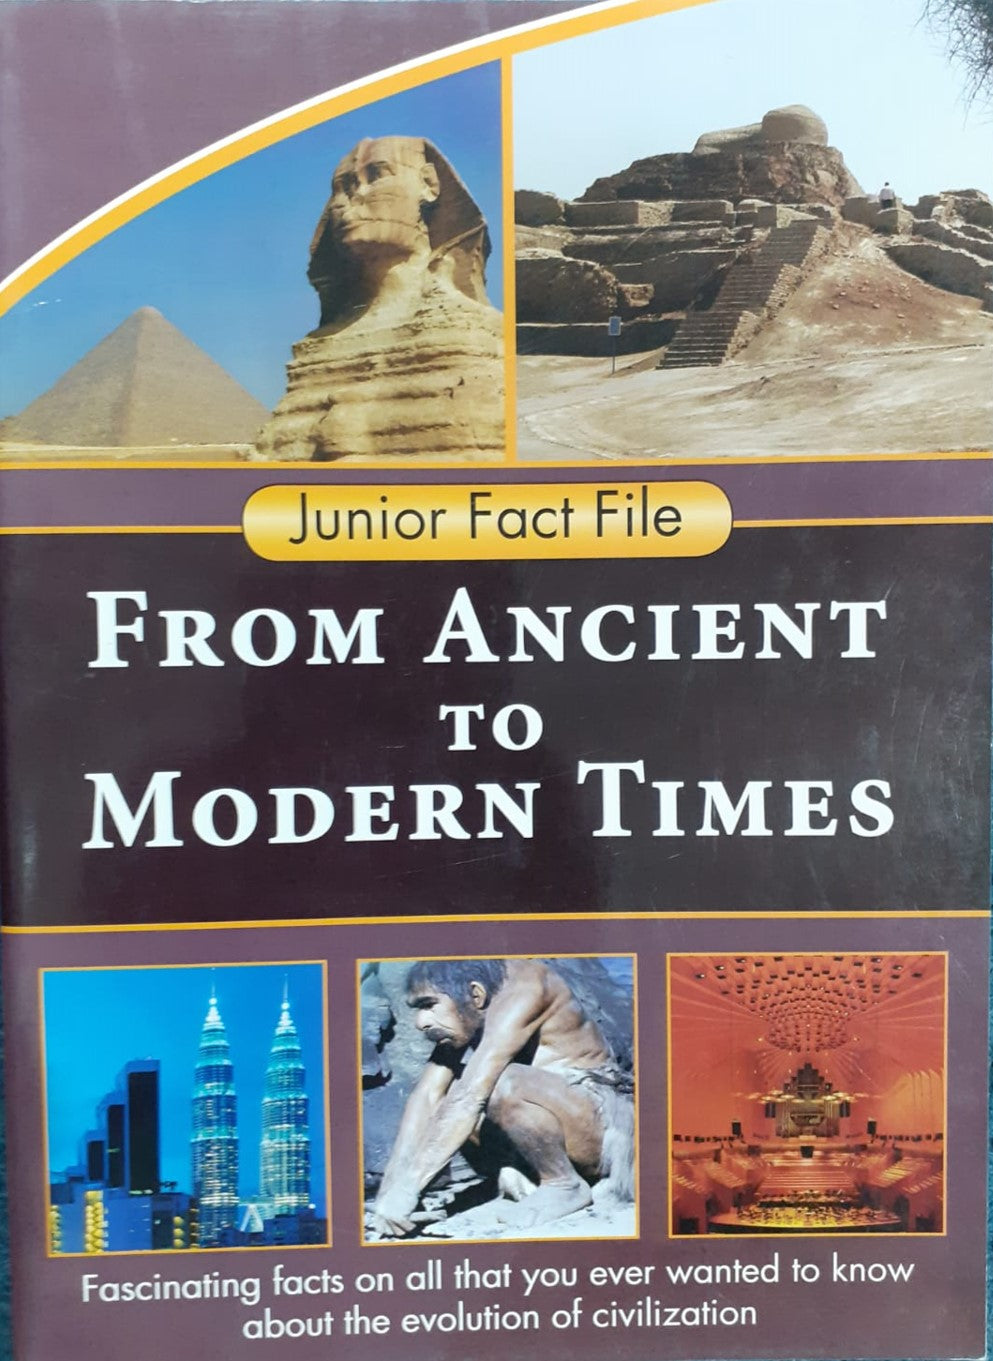 JUNIOR FACT FILE - FROM ANCIENT TO MODERN TIMES